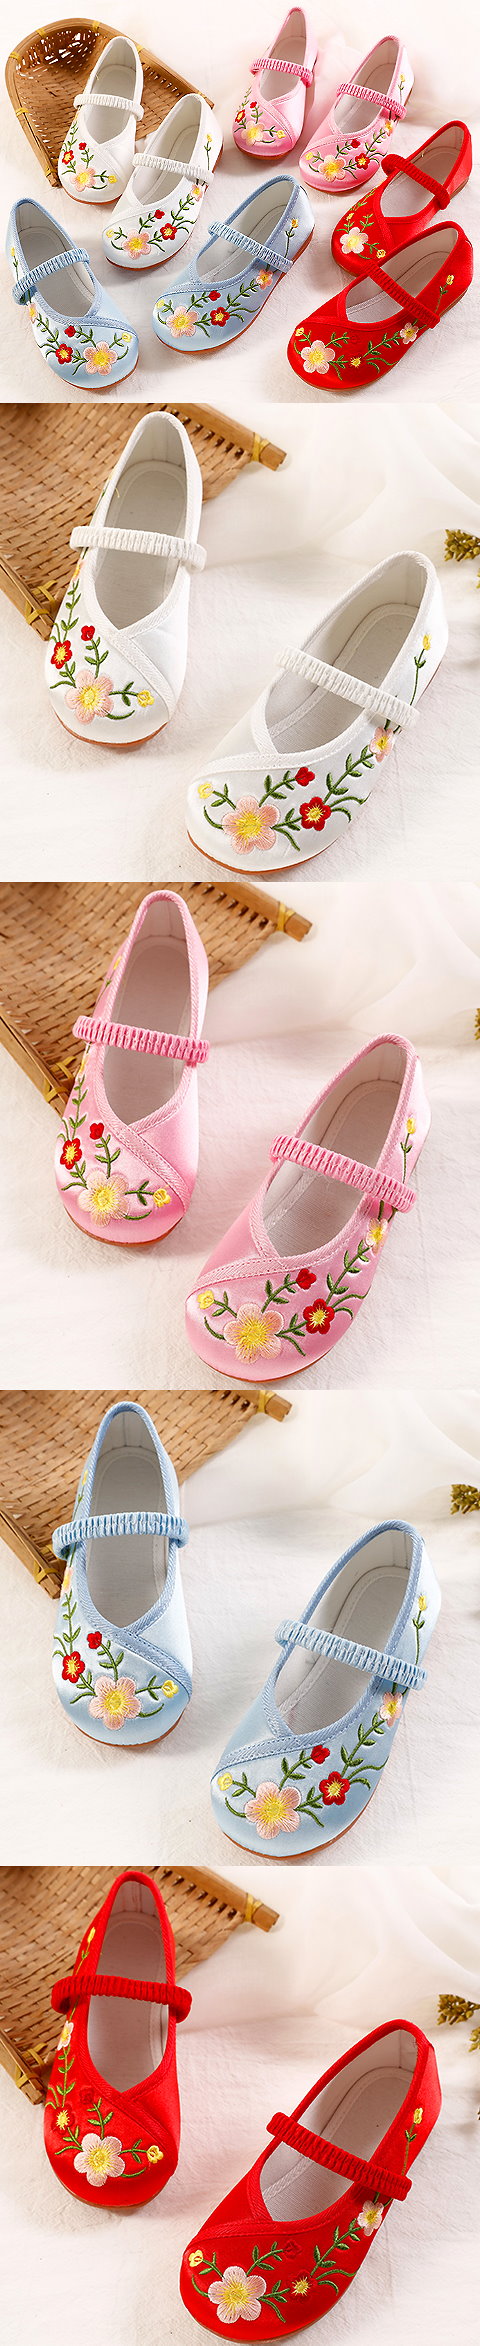 Girl's Large Plum Blossom Embroidery Shoes (Multicolor)